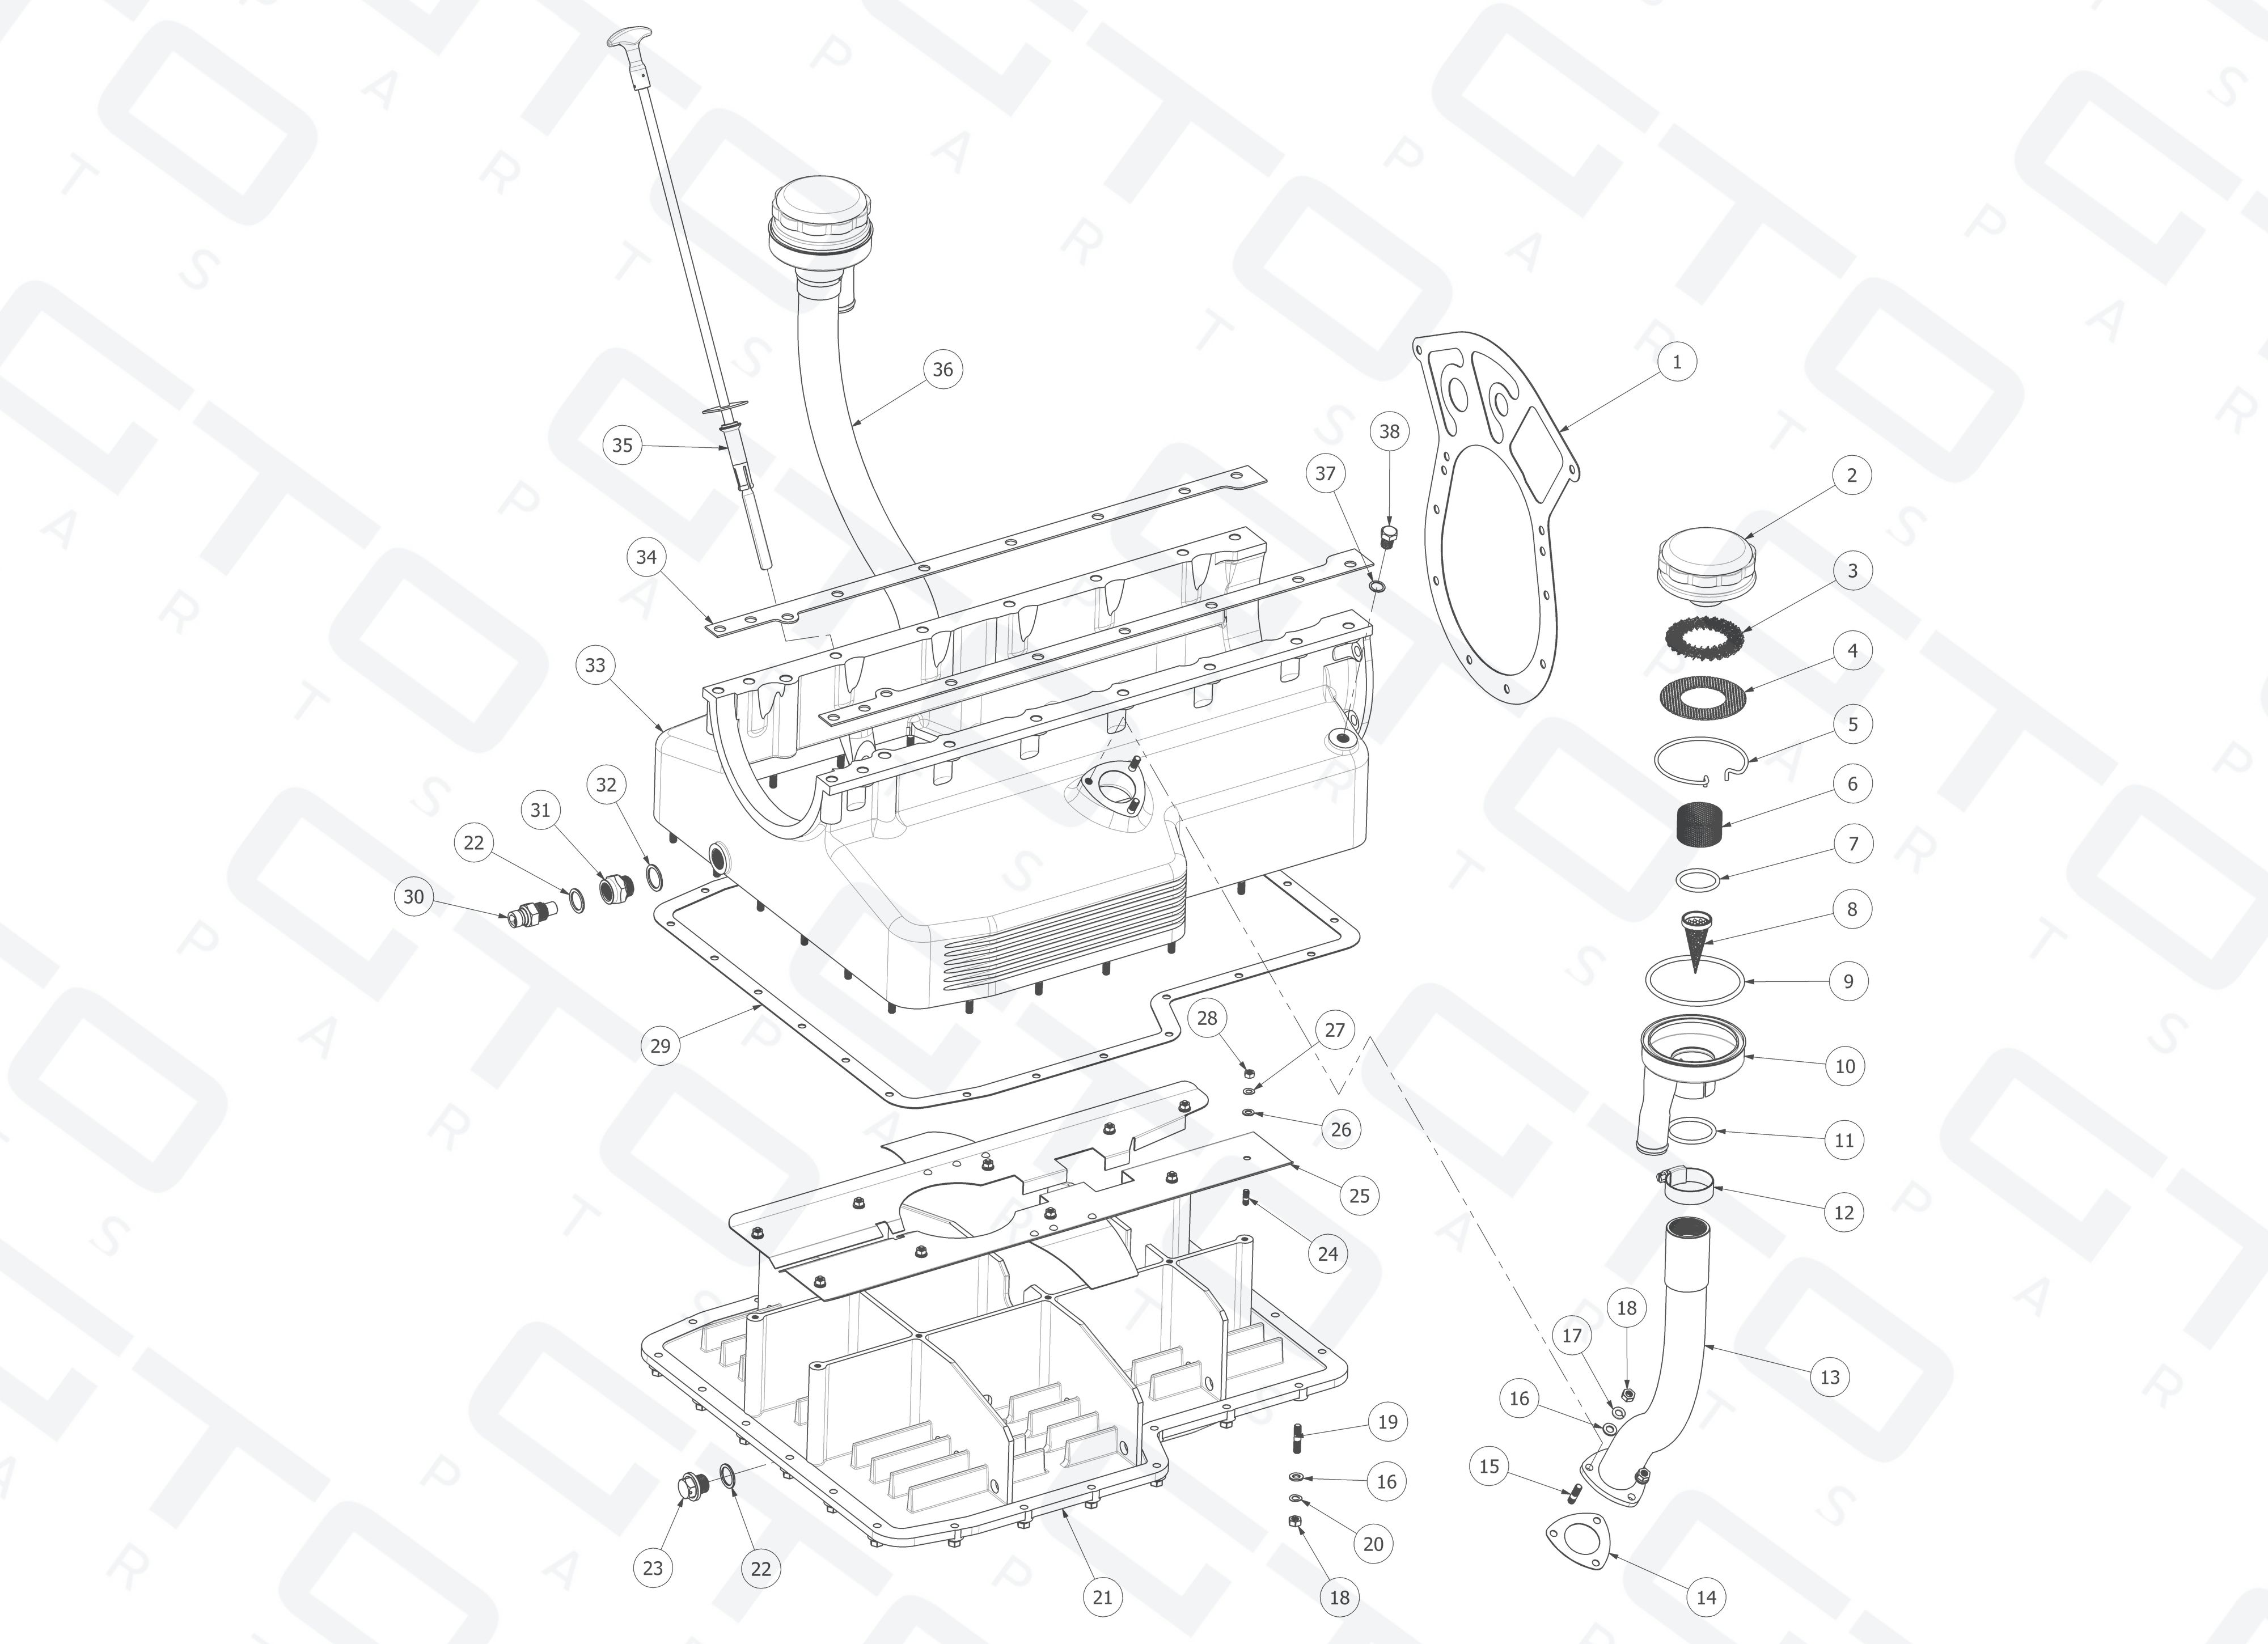 Schematic: 250 Swb Sump Assembly